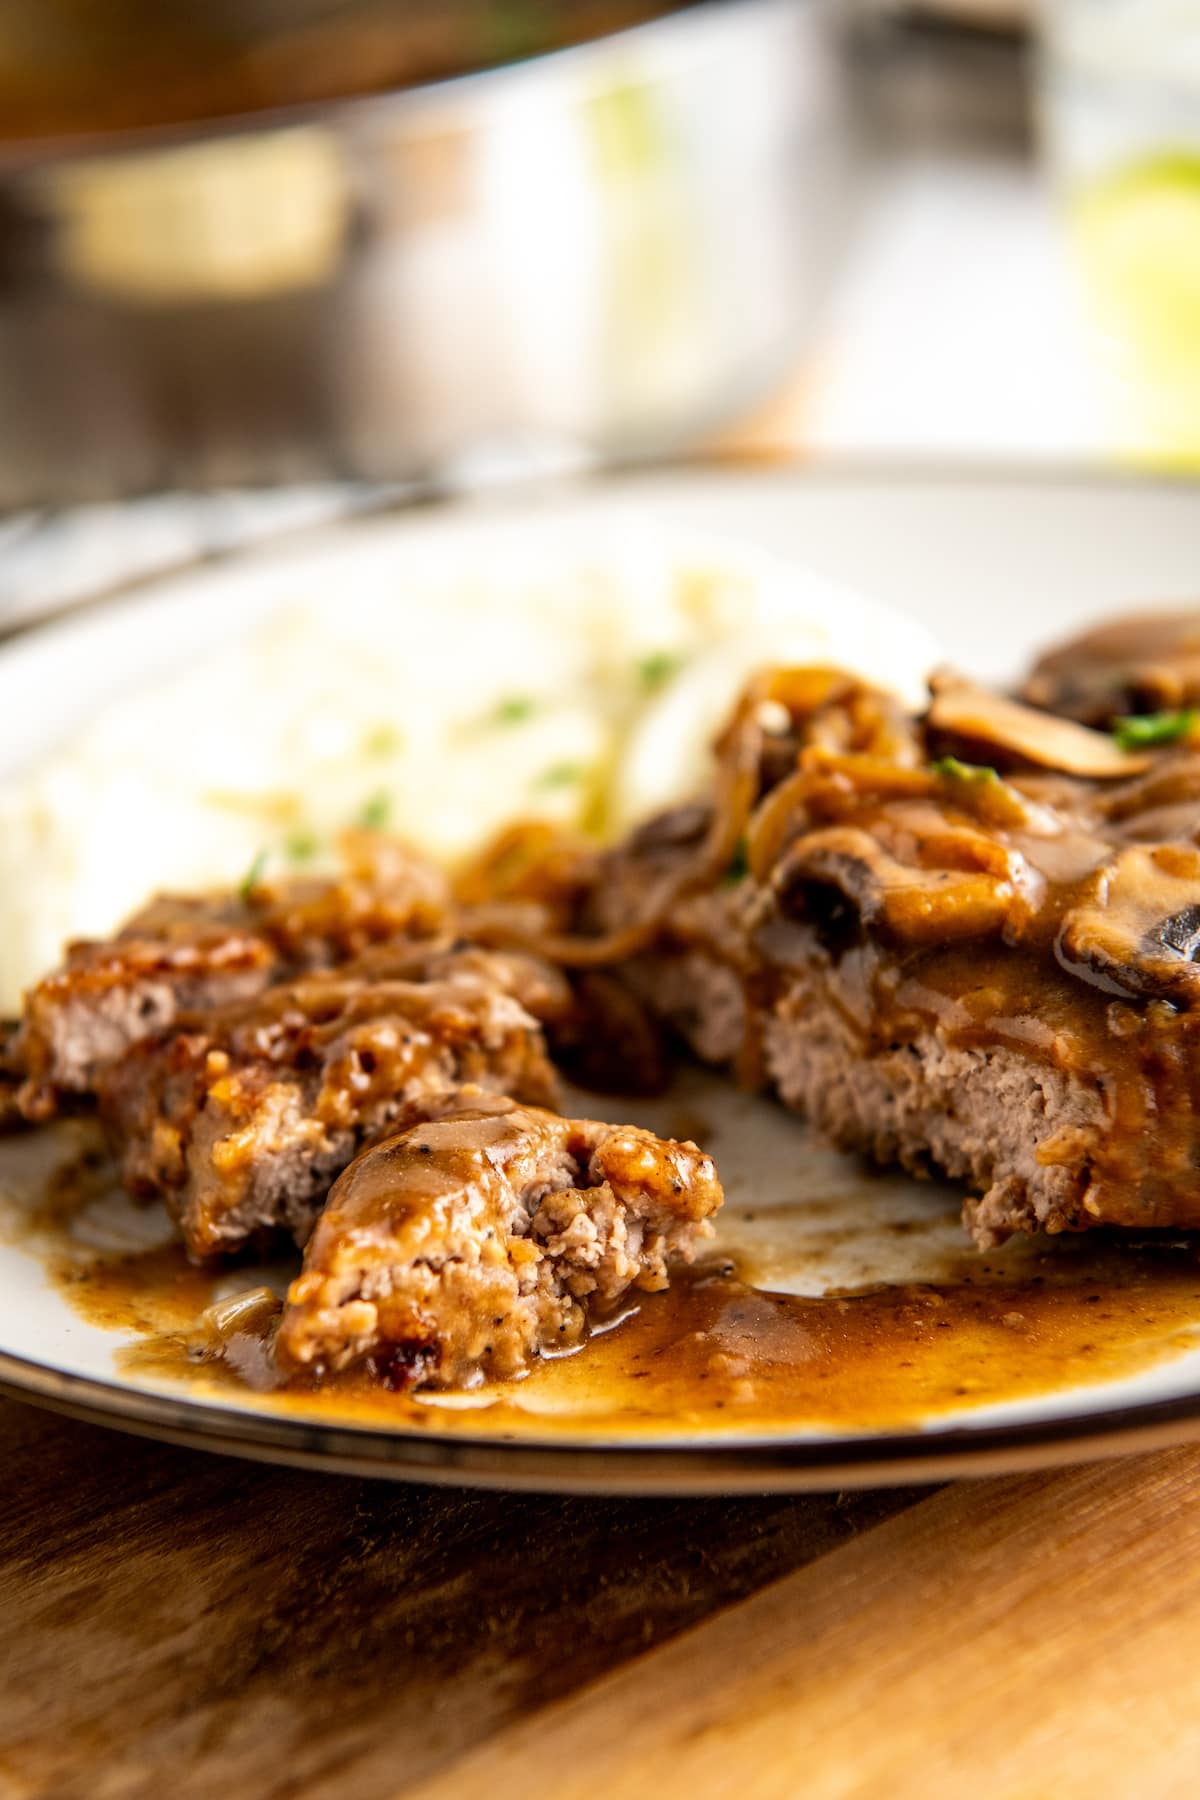 A smothered steak with mushrooms on a plate, with a few bites cut out